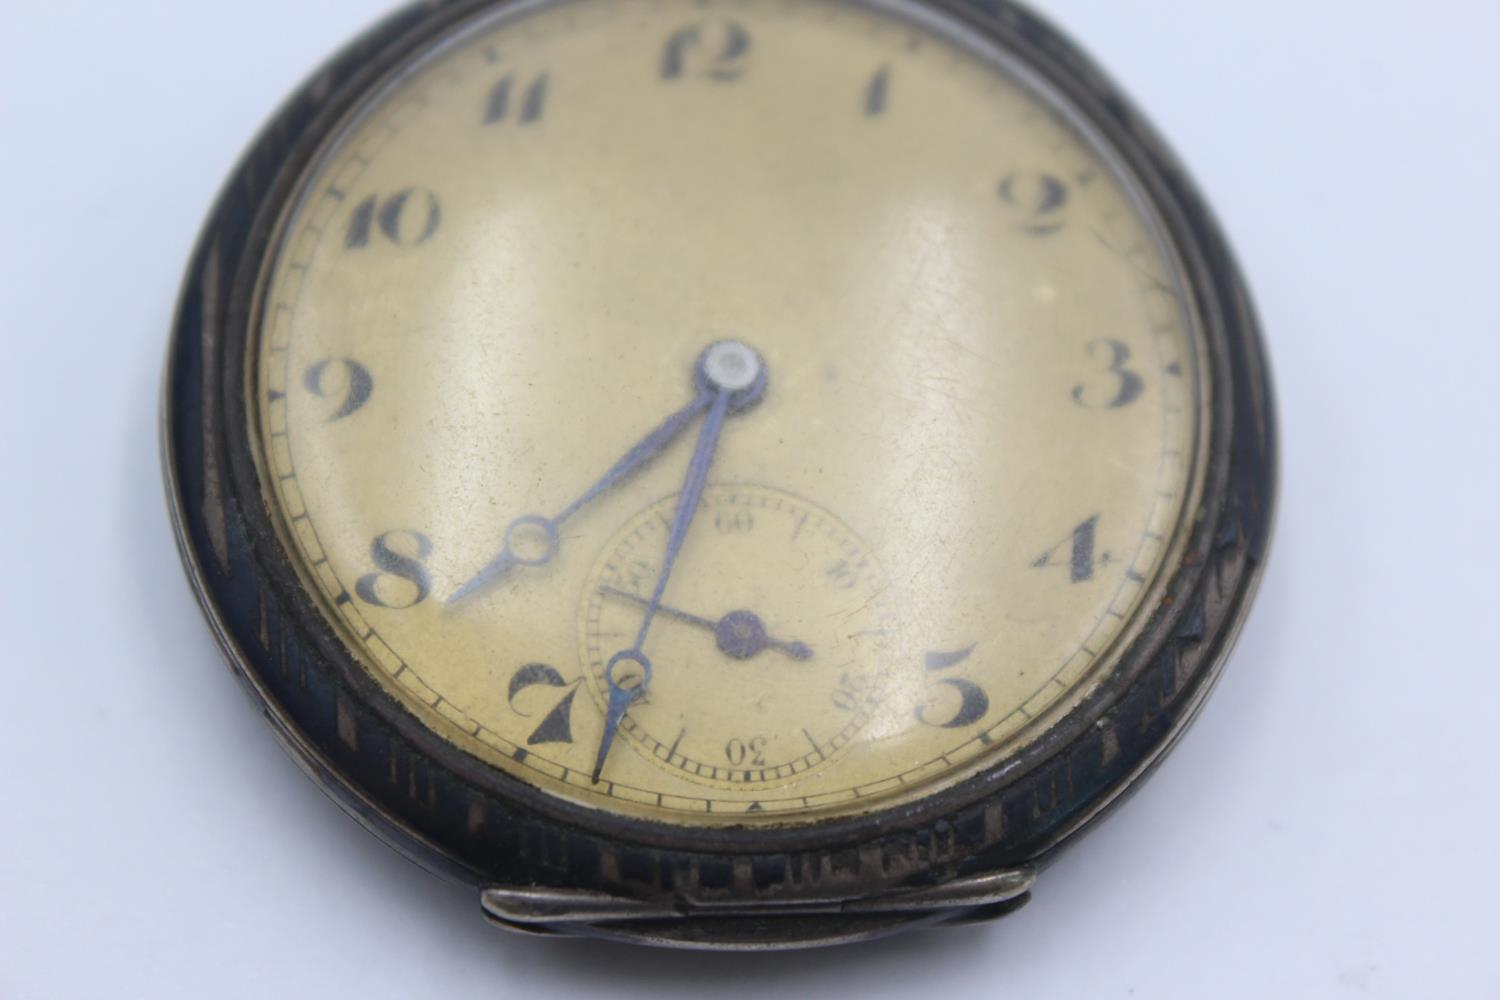 Vintage Gents ORTA 800 SILVER Cased Open Face POCKET WATCH Hand-Wind WORKING 63g Vintage Gents 'ORT - Image 3 of 4